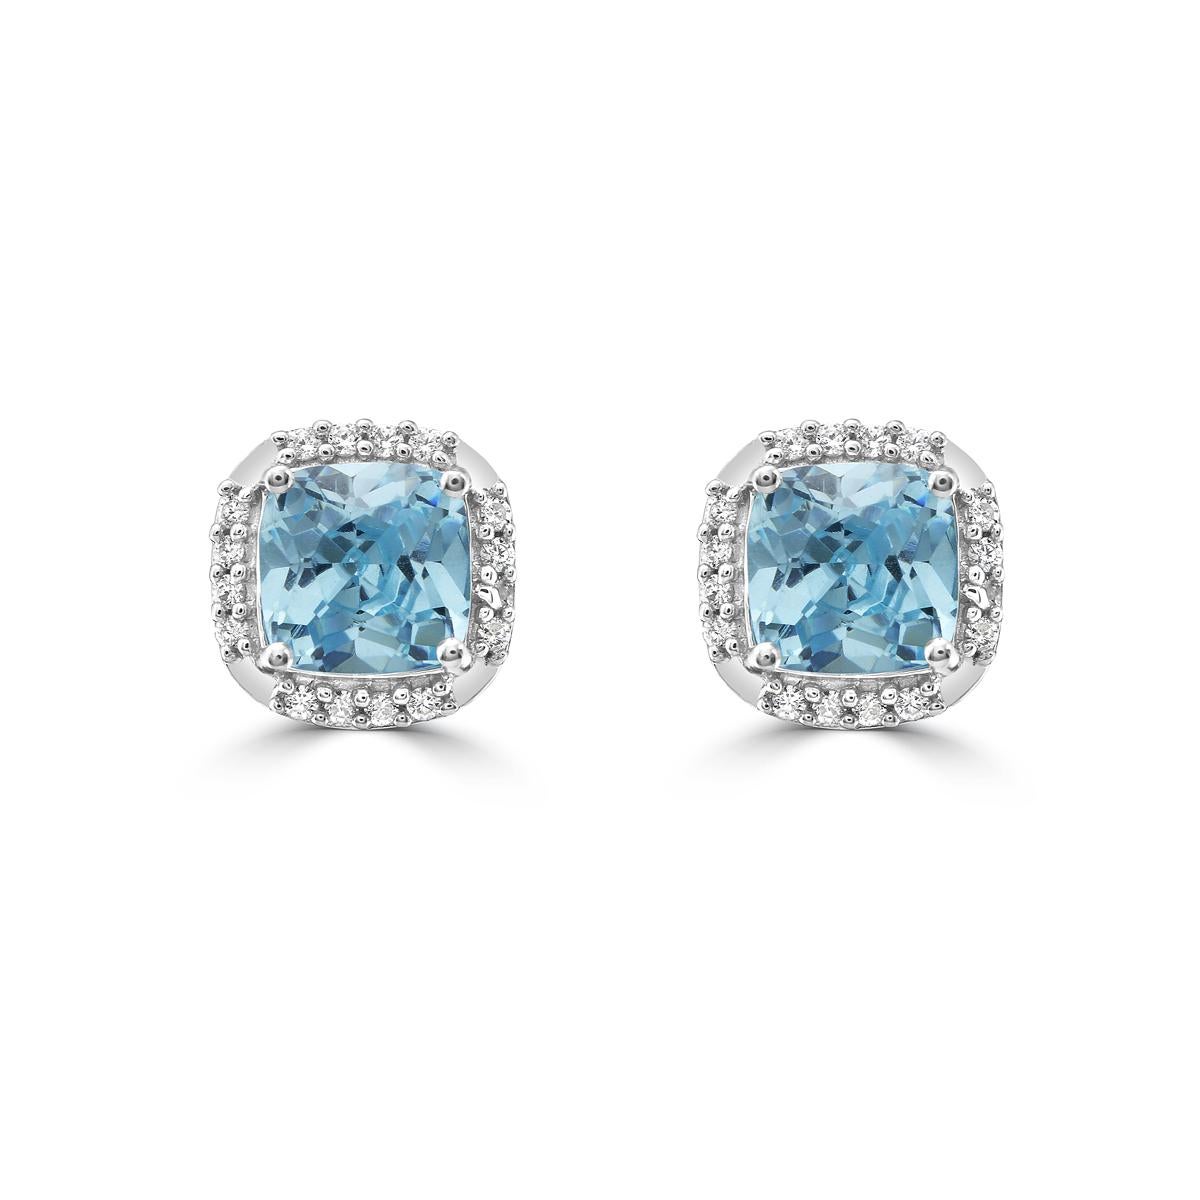 Add a pop of color to your wardrobe with these stunning blue topaz studs featuring sparkling diamonds in a halo design. Set in 14K White Gold, these stud earrings feature 5x5mm cushion cut blue topazes, with diamonds totaling 0.07ct in weight. The